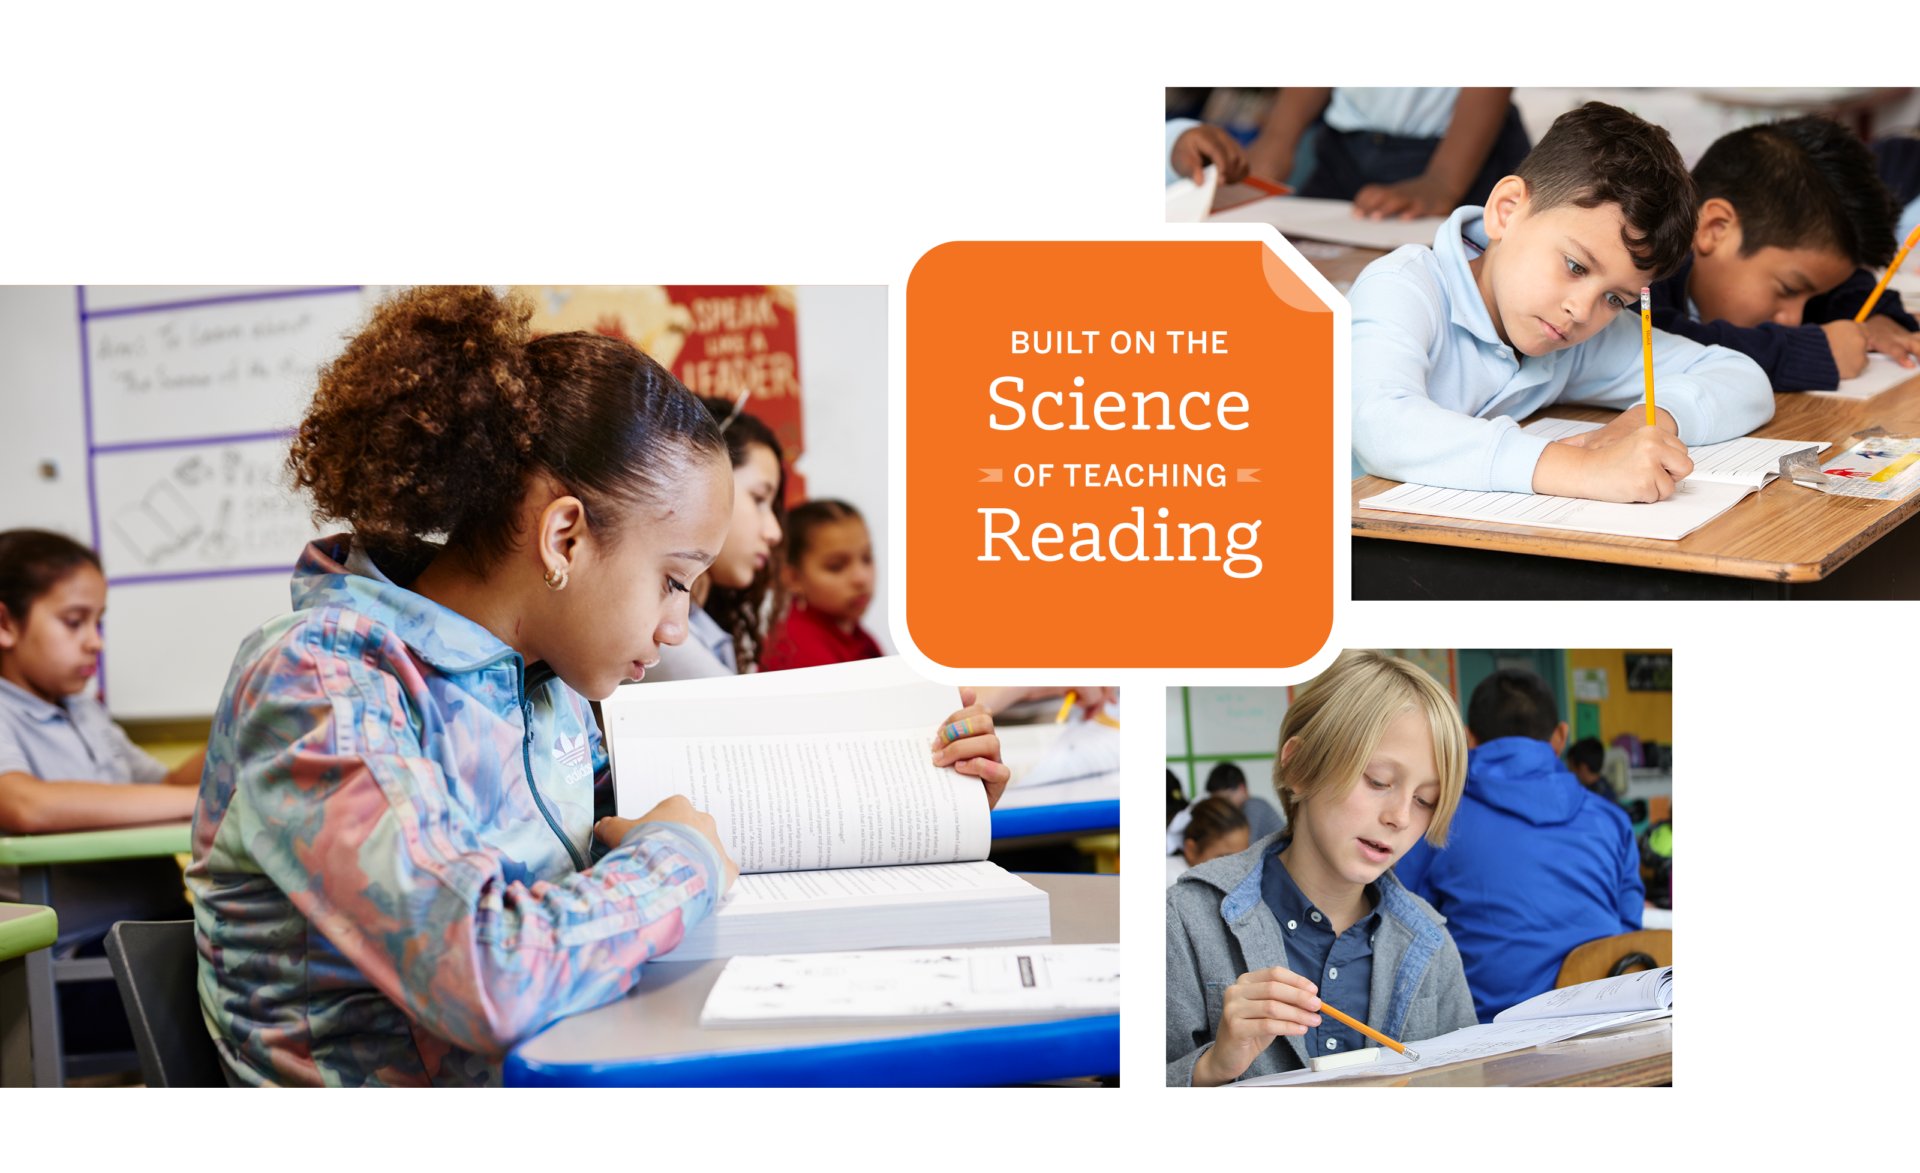 Collage of three images showing diverse students engaged in classroom activities, with an overlay text about reading science.